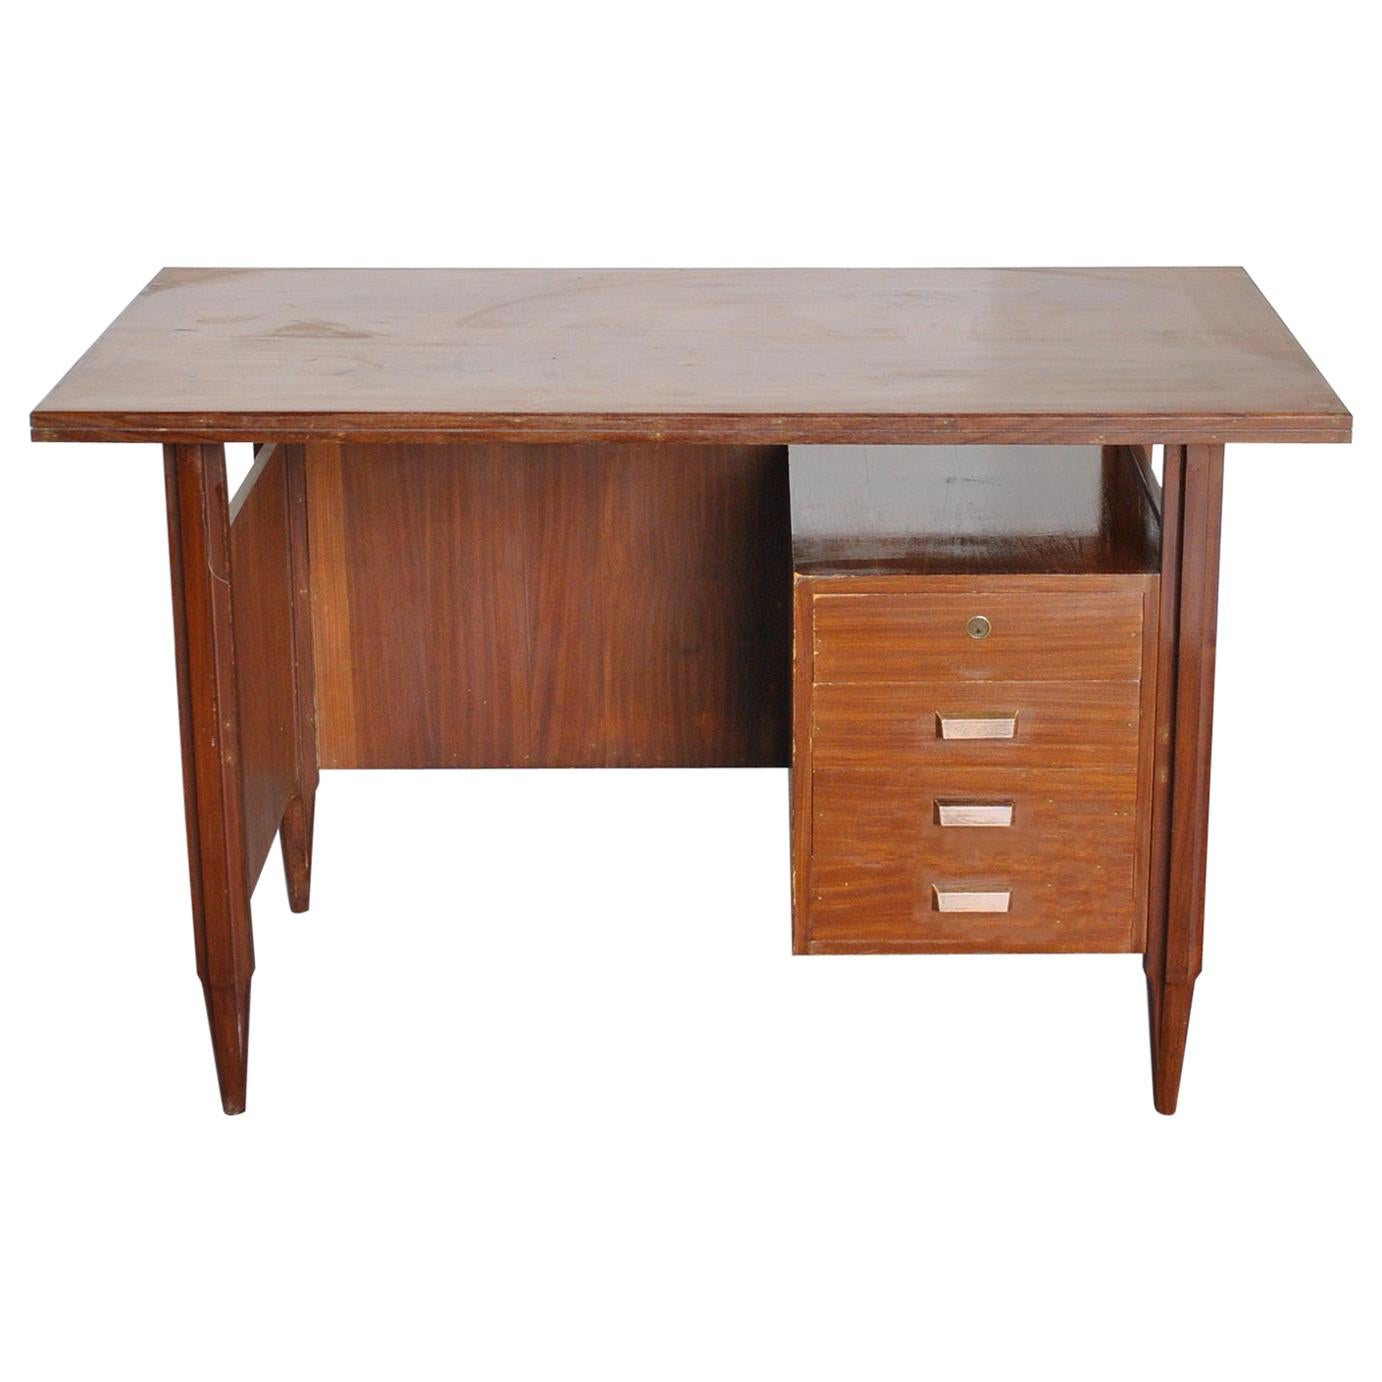 Italian Wooden Desk from the 60's For Sale